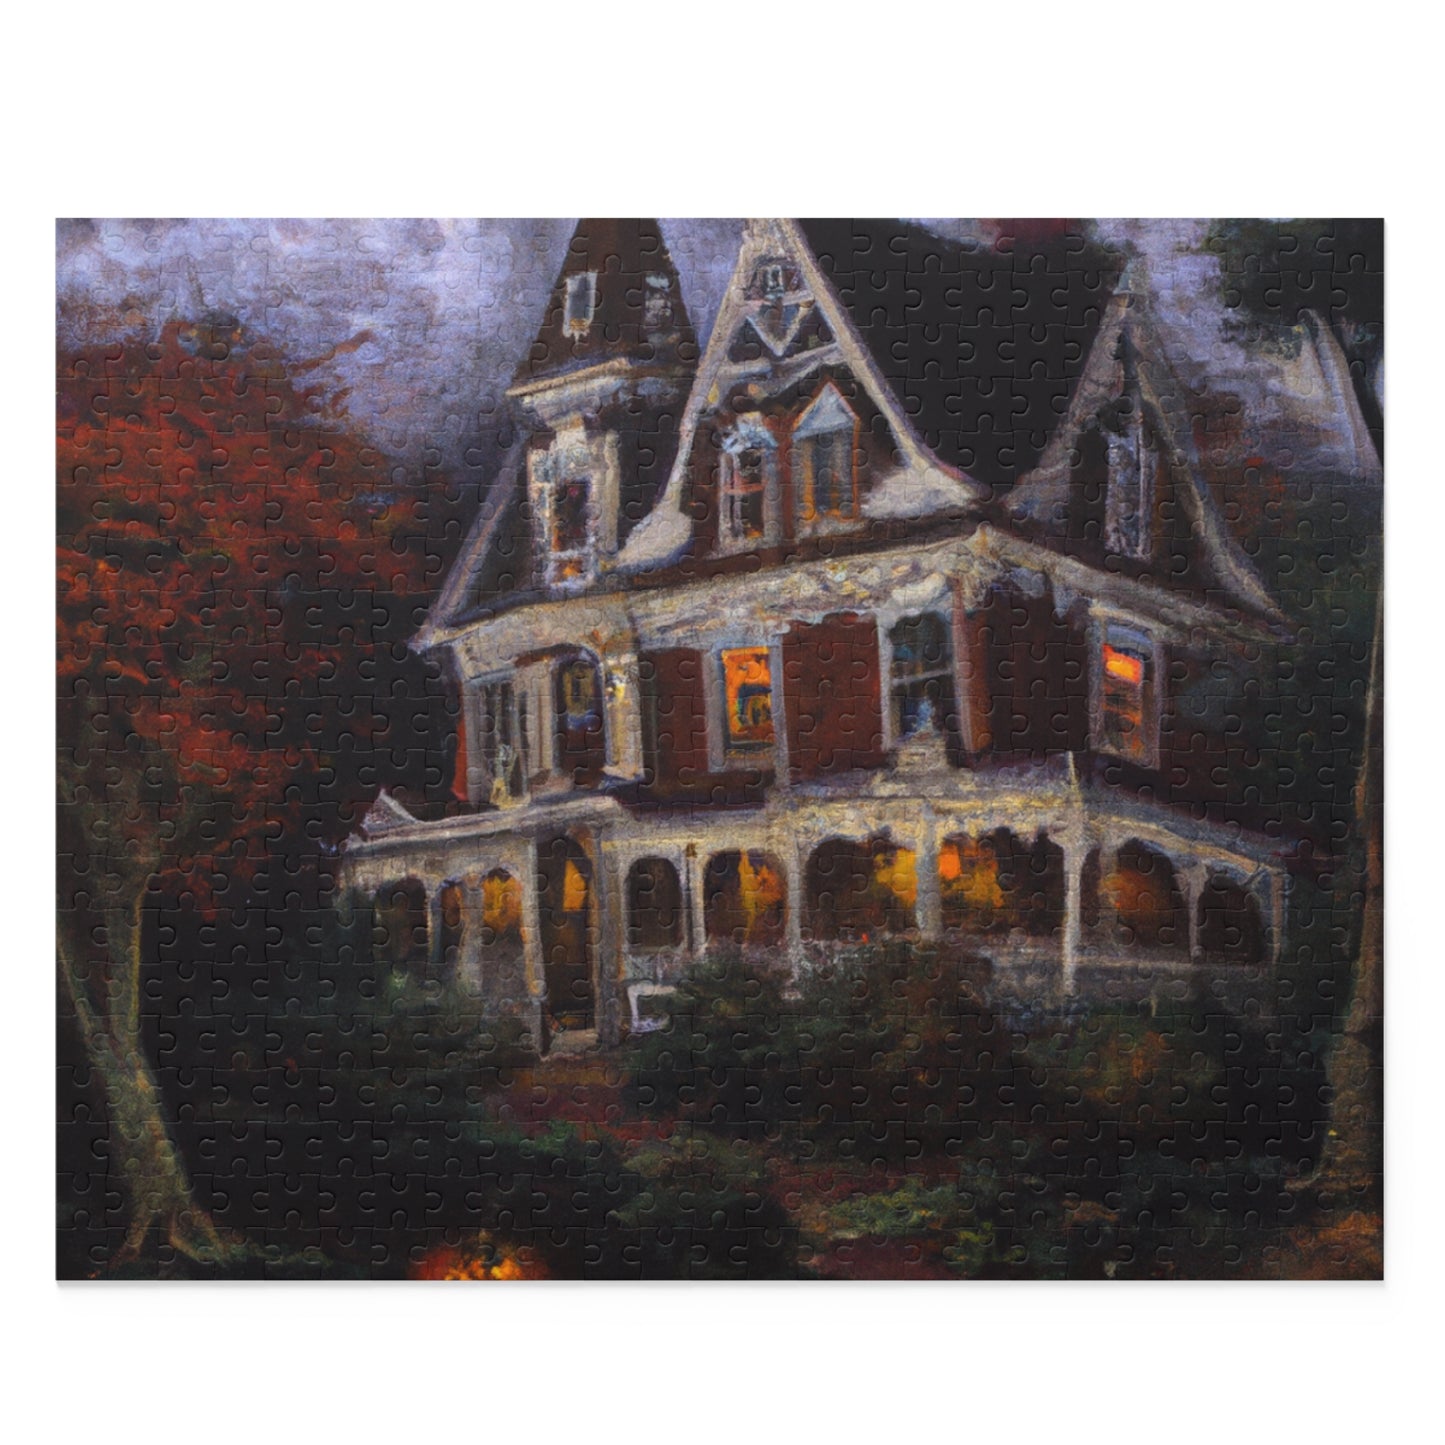 The Haunted Mansion  - JigSaw Puzzle 500 Piece: Phantom Reaperzpah - Halloween Gift | Spooky Scenes